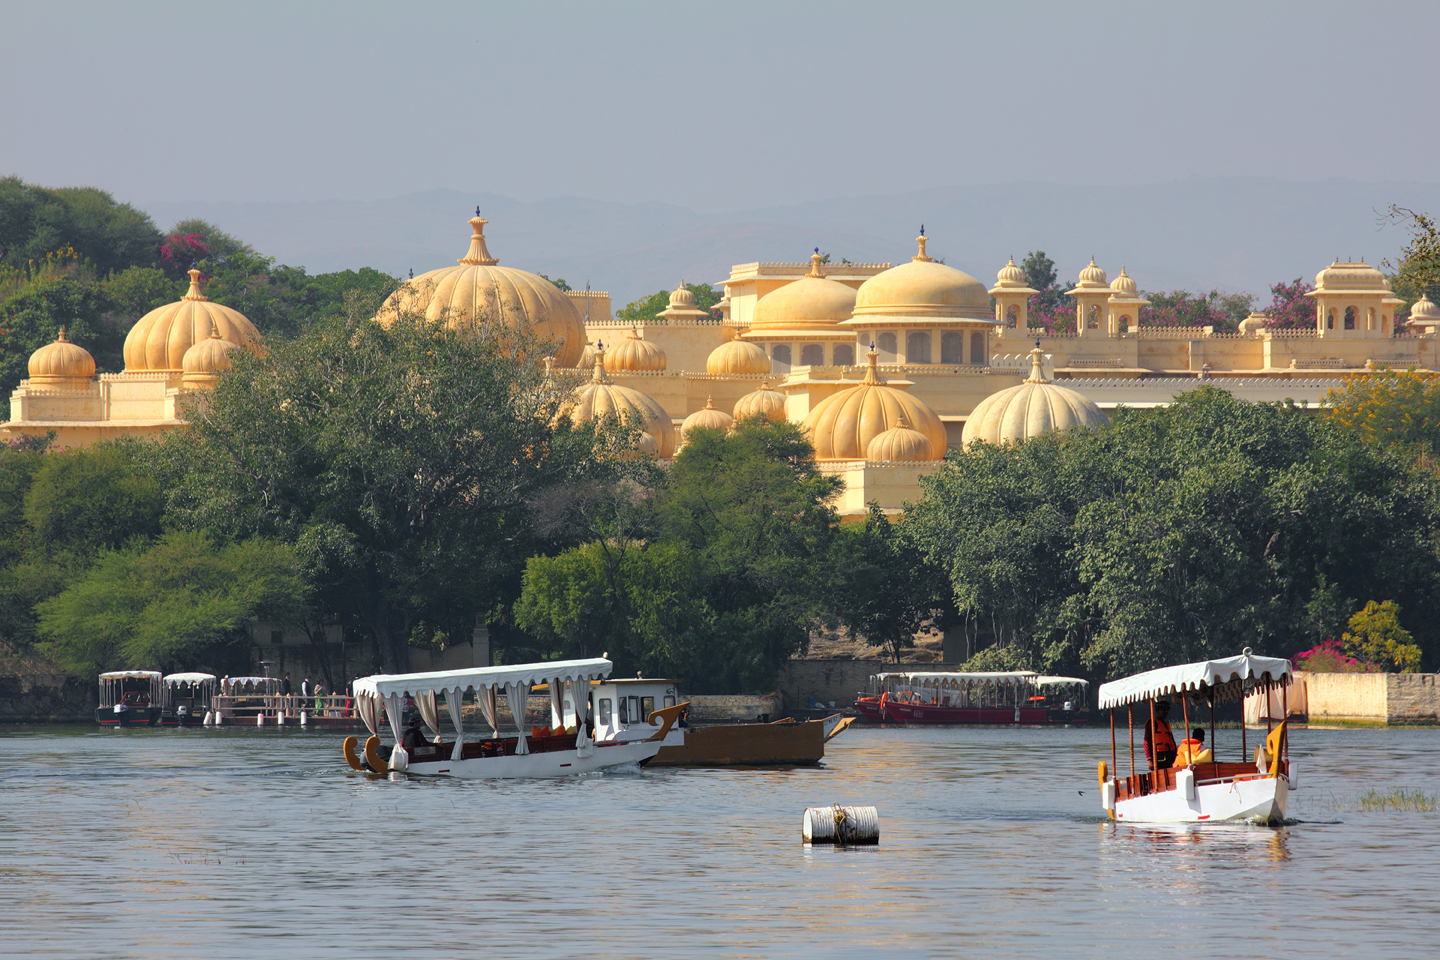 Boats and palace on Pichola lake in Udaipur